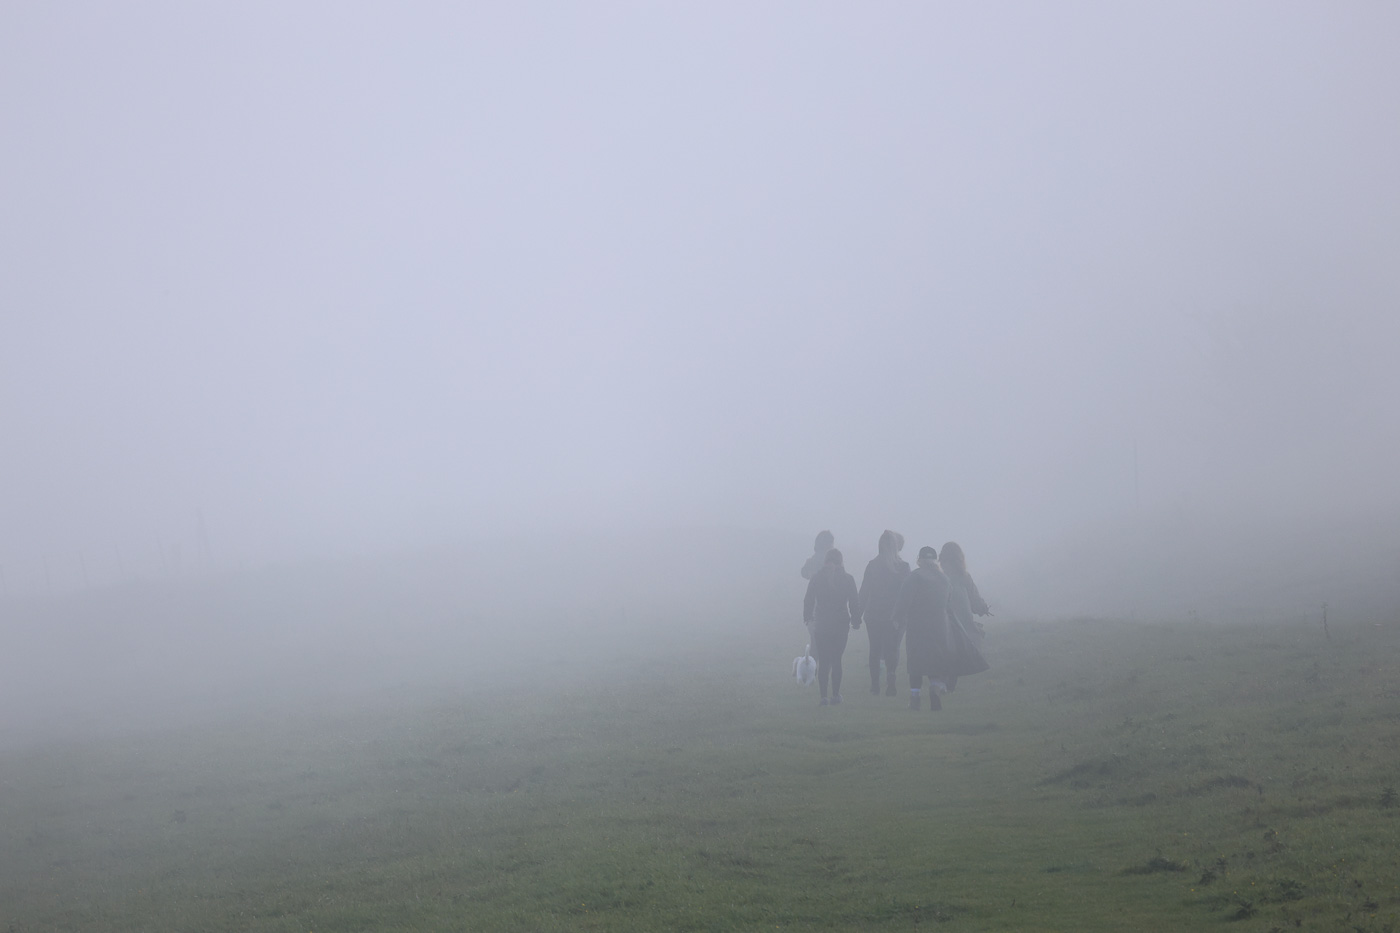 Figures in the mist using the R6 2 camera